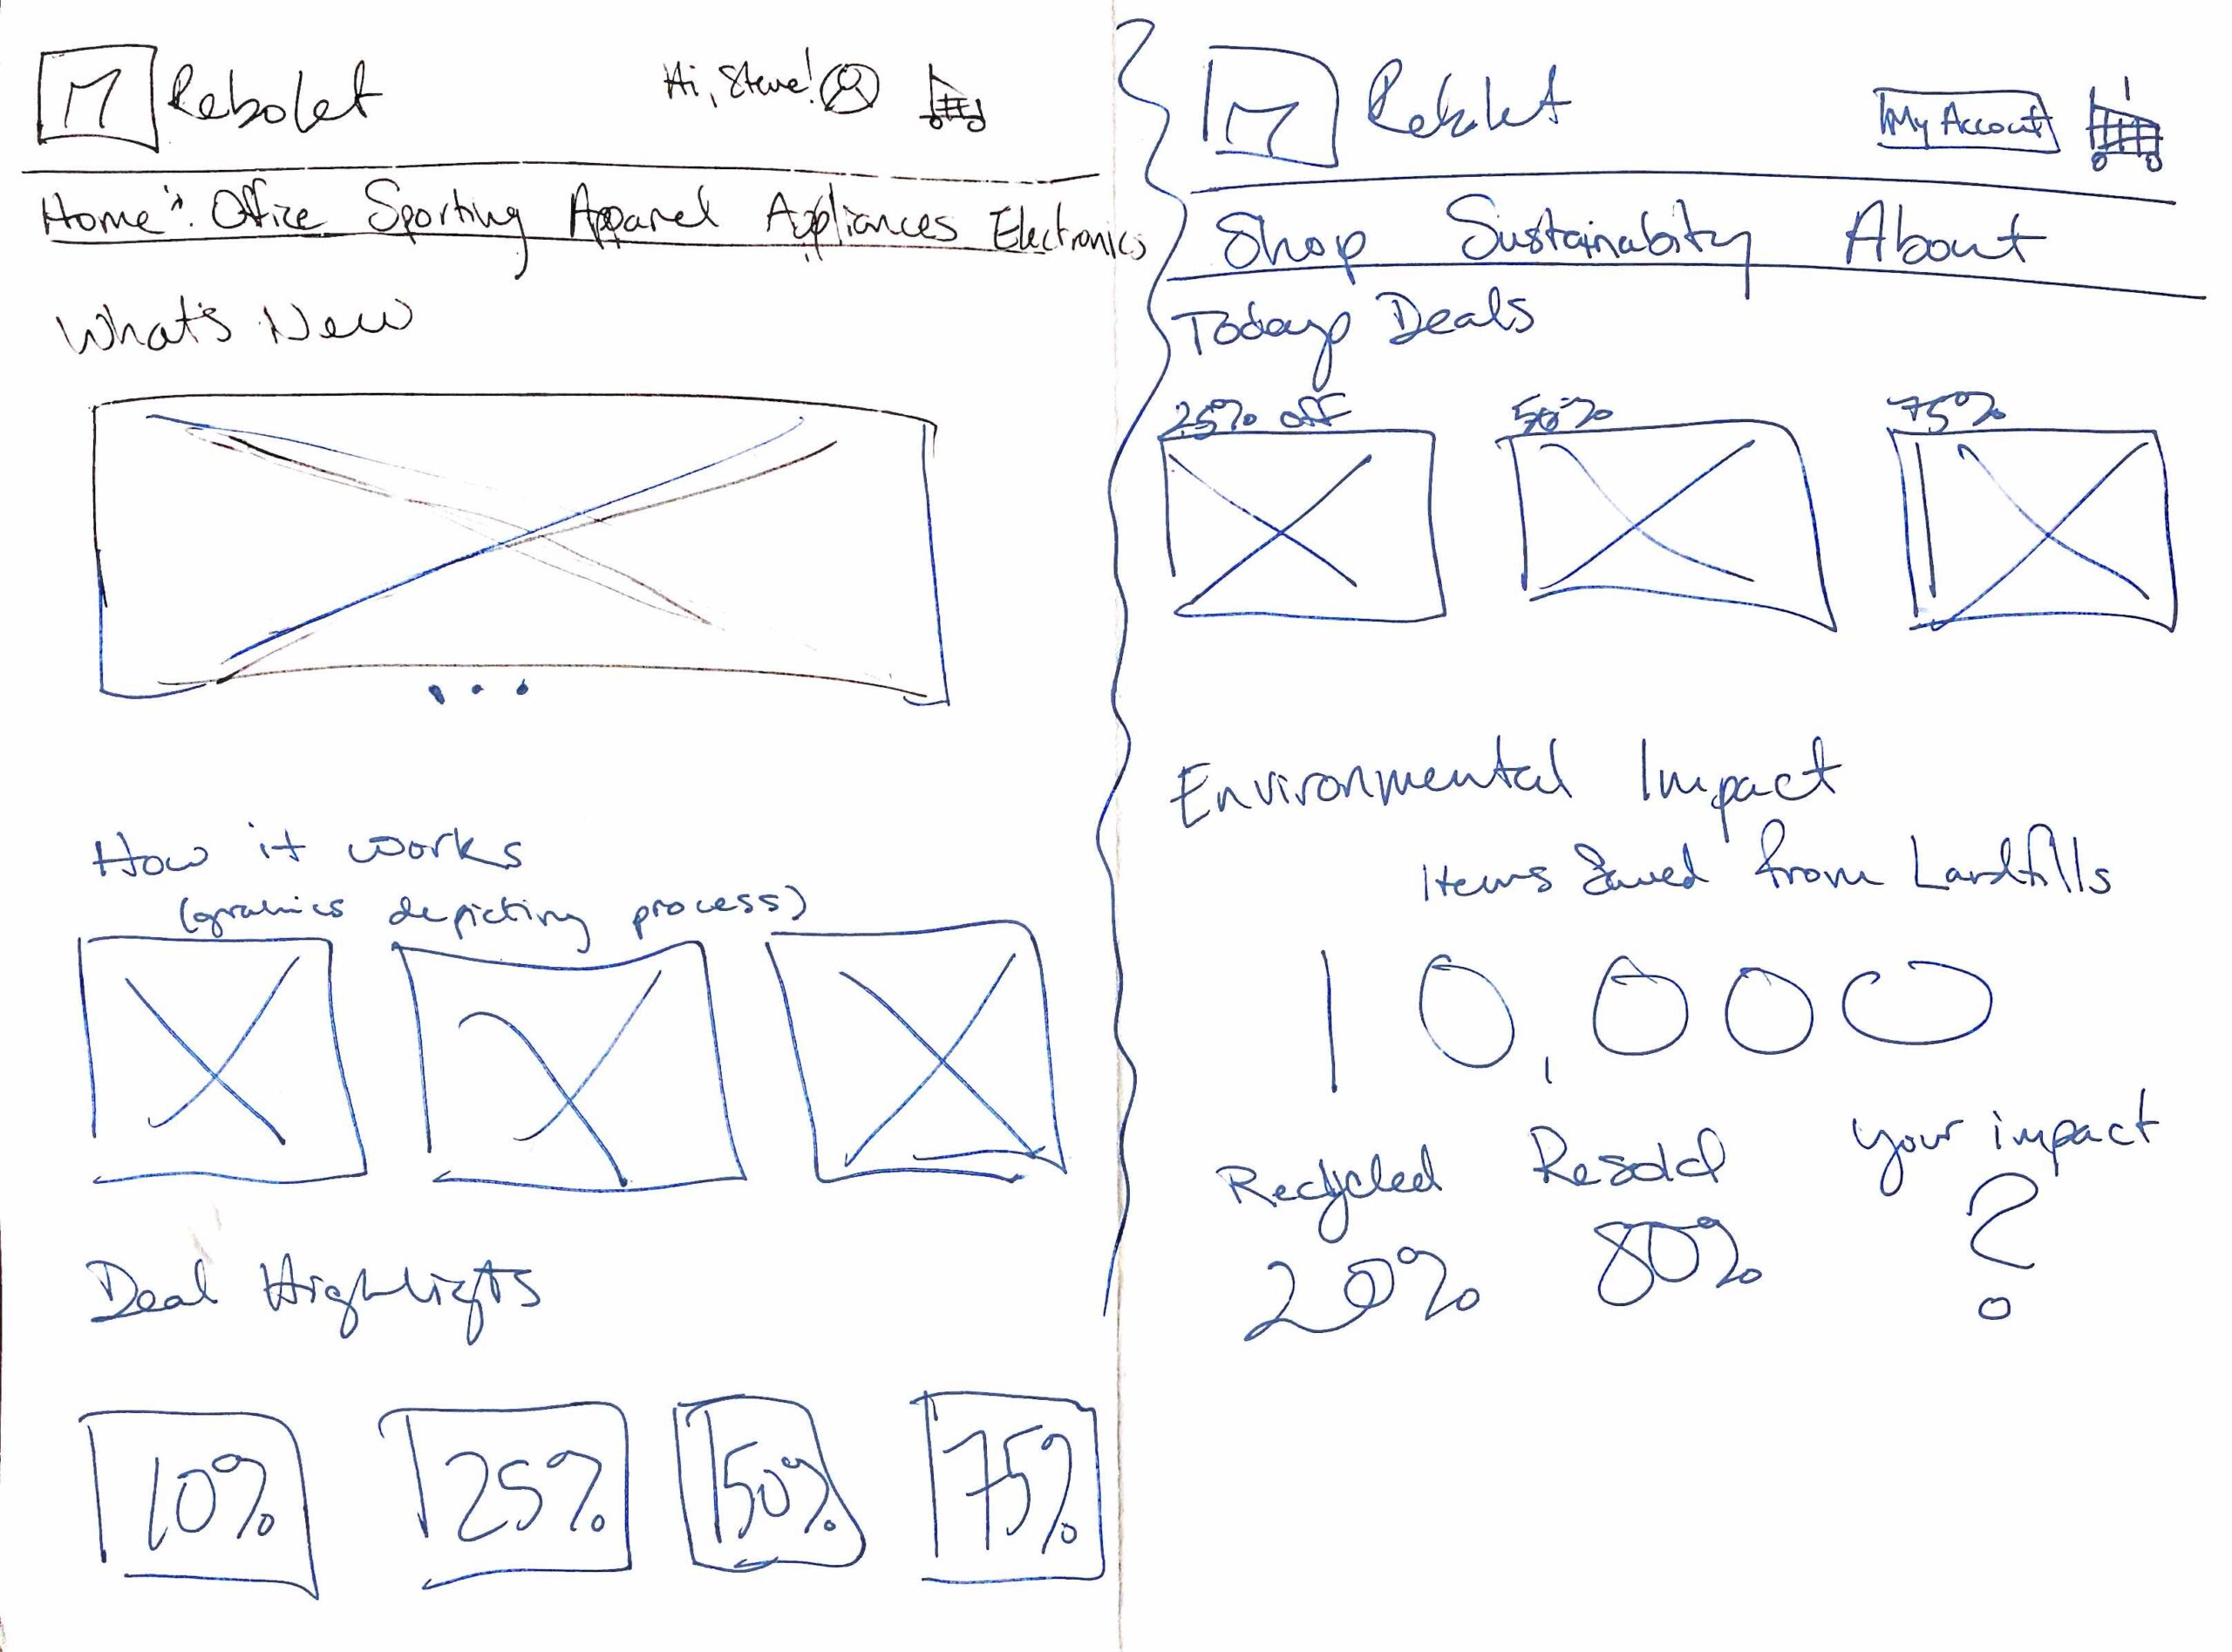 Hand-sketched Rebolet home page and sustainability ideation